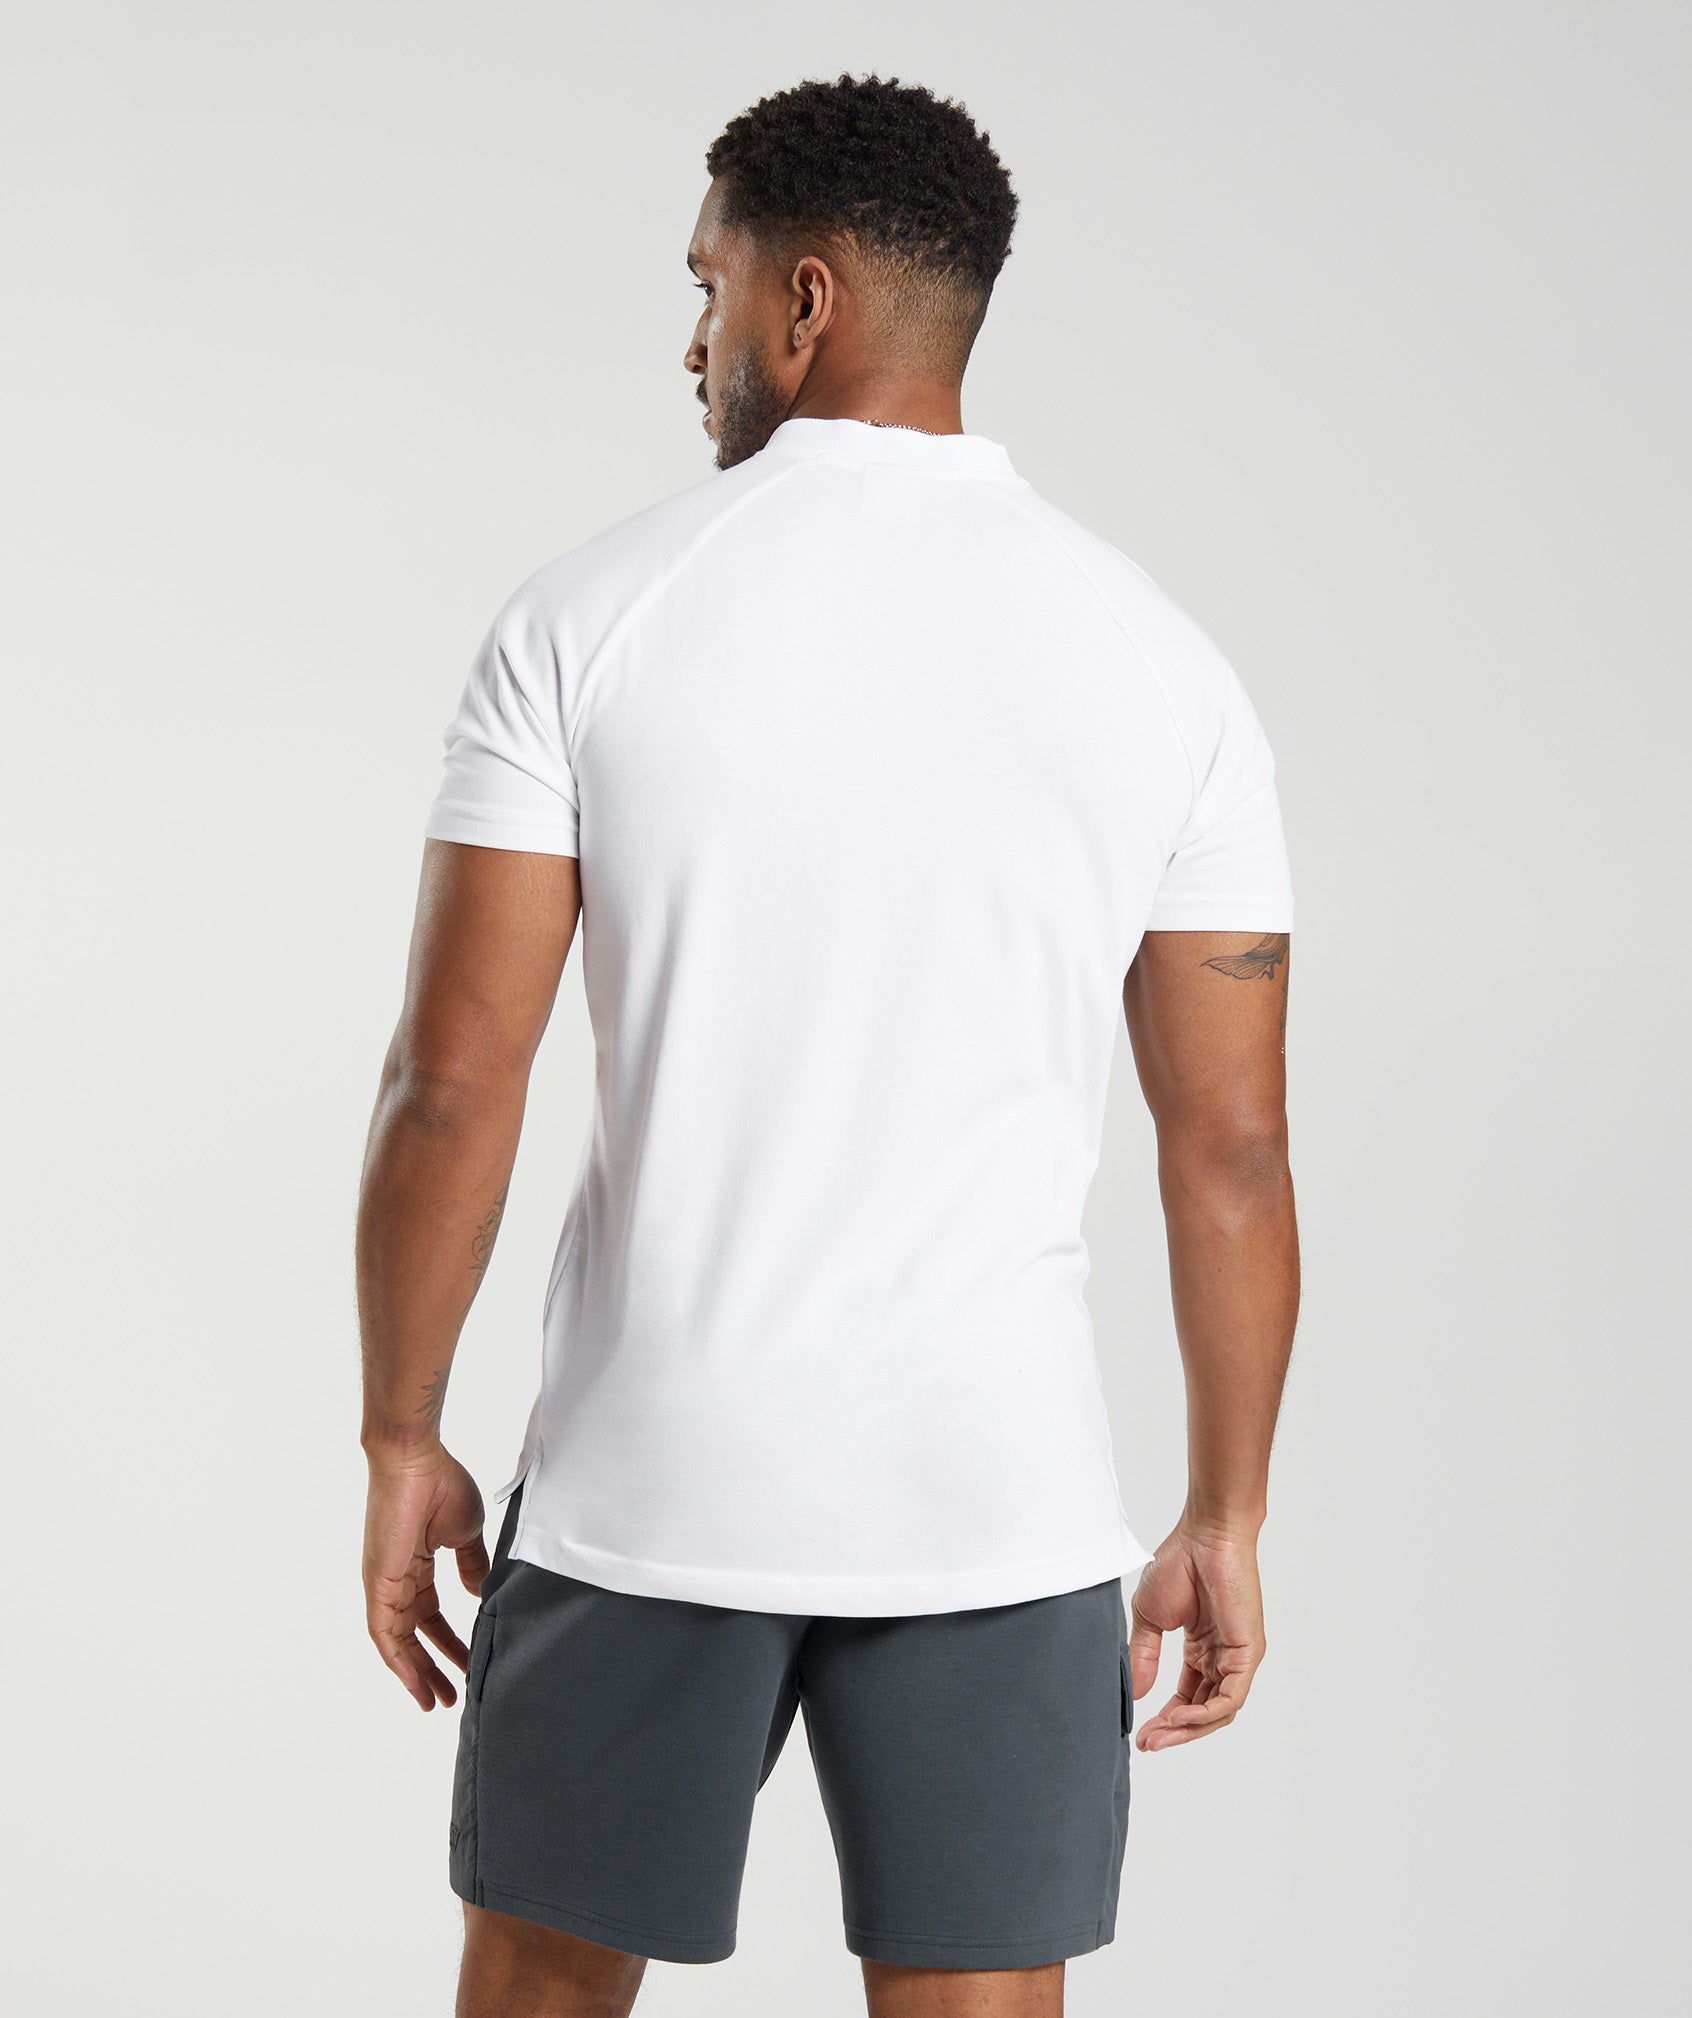 Rest Day Commute Polo Shirt in White